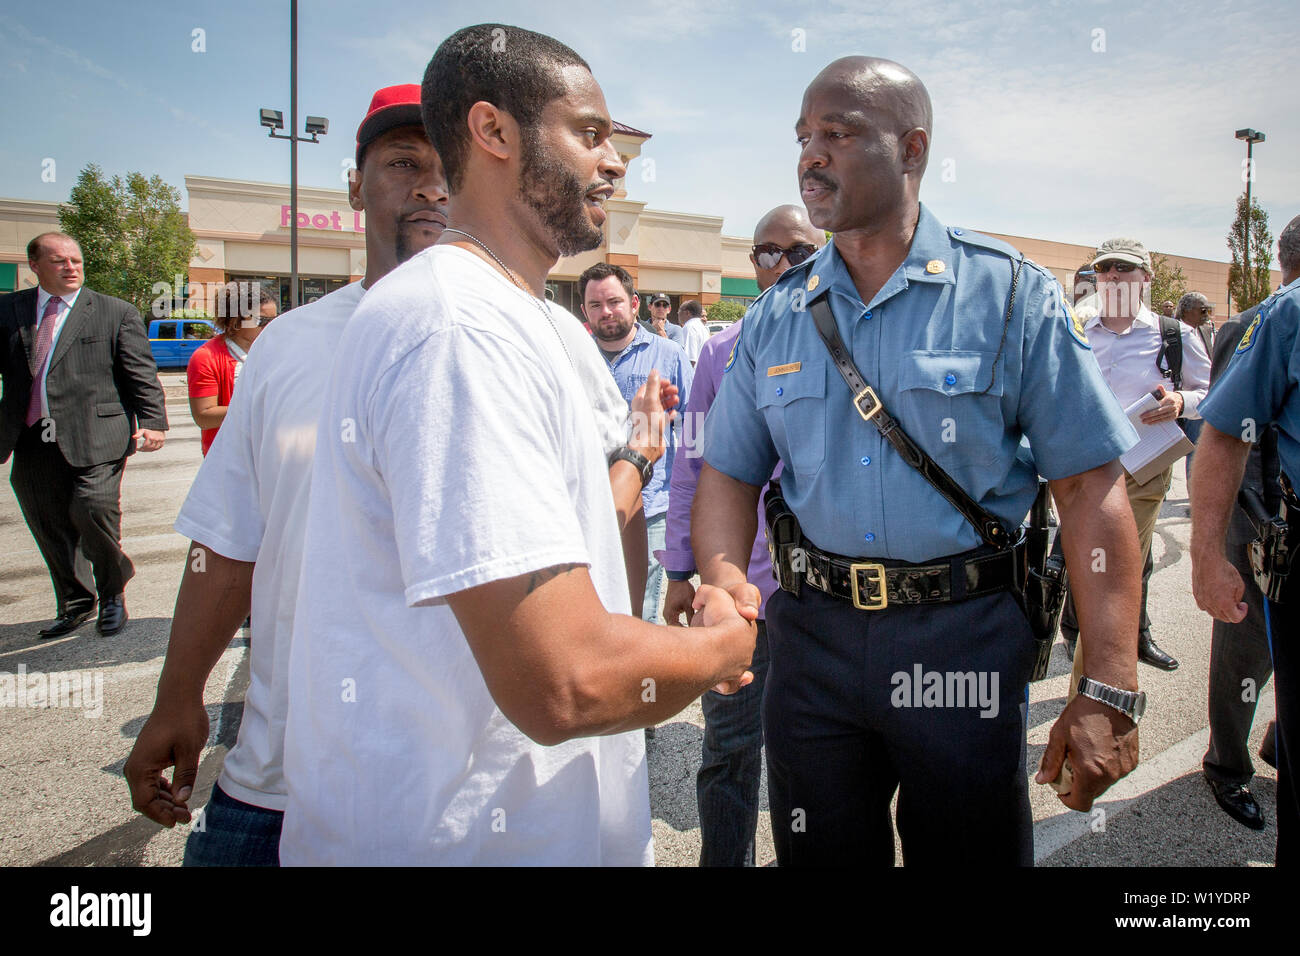 Captain Ronald Johnson of the Missouri State Highway Patrol walks and talks with the protesters in an attempt to de-escalate the tensions following the riots and protests after the killing of Michael Brown. Stock Photo